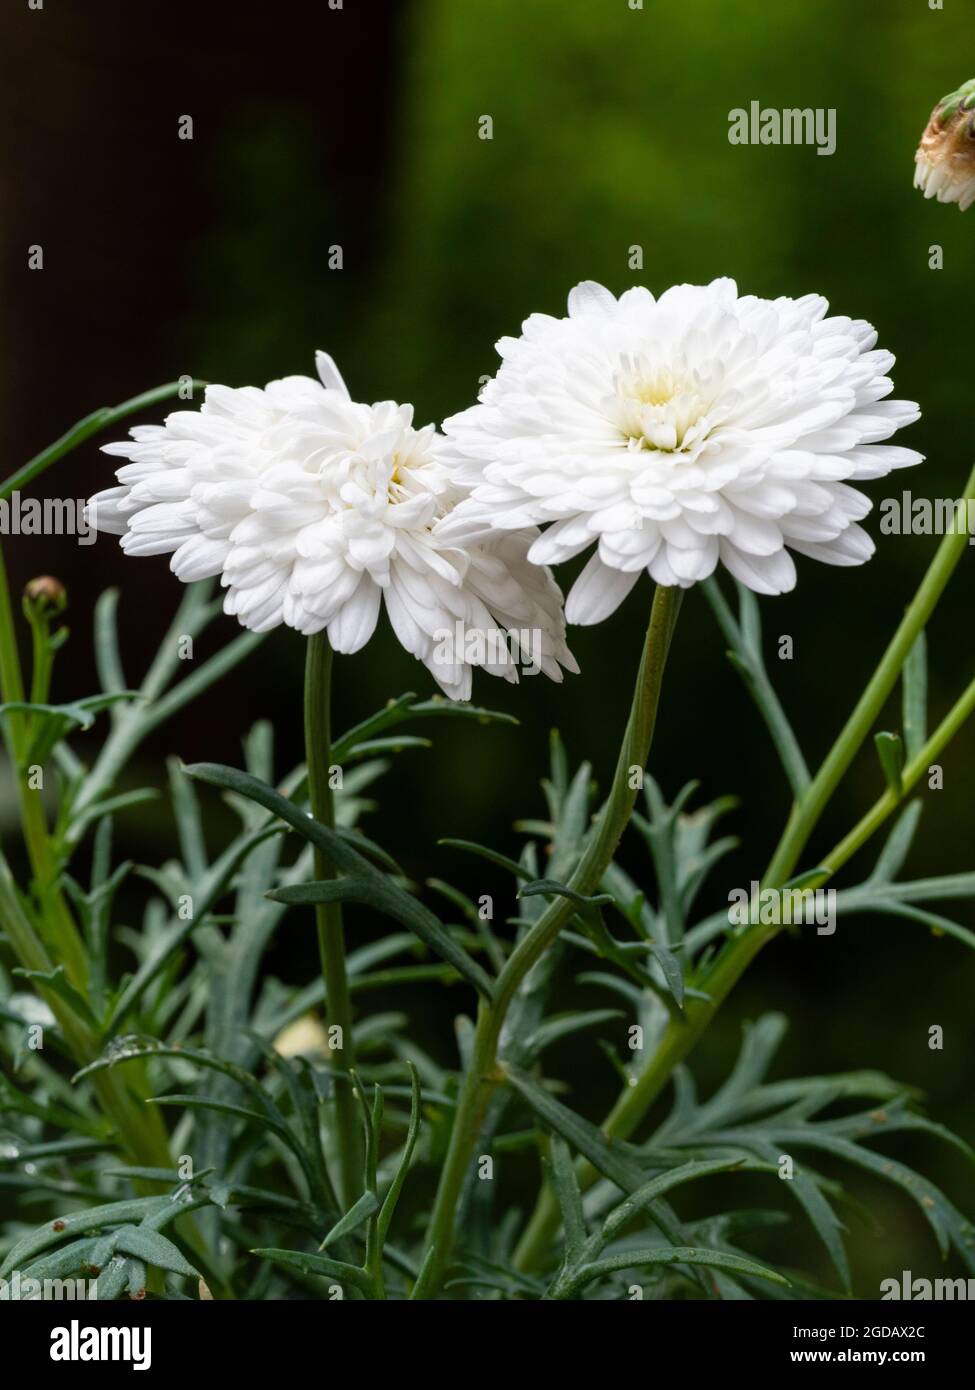 Intricate double summer flowers of the half hardy marguerite daisy, Argyranthemum frutescens 'Molimba Double White' Stock Photo